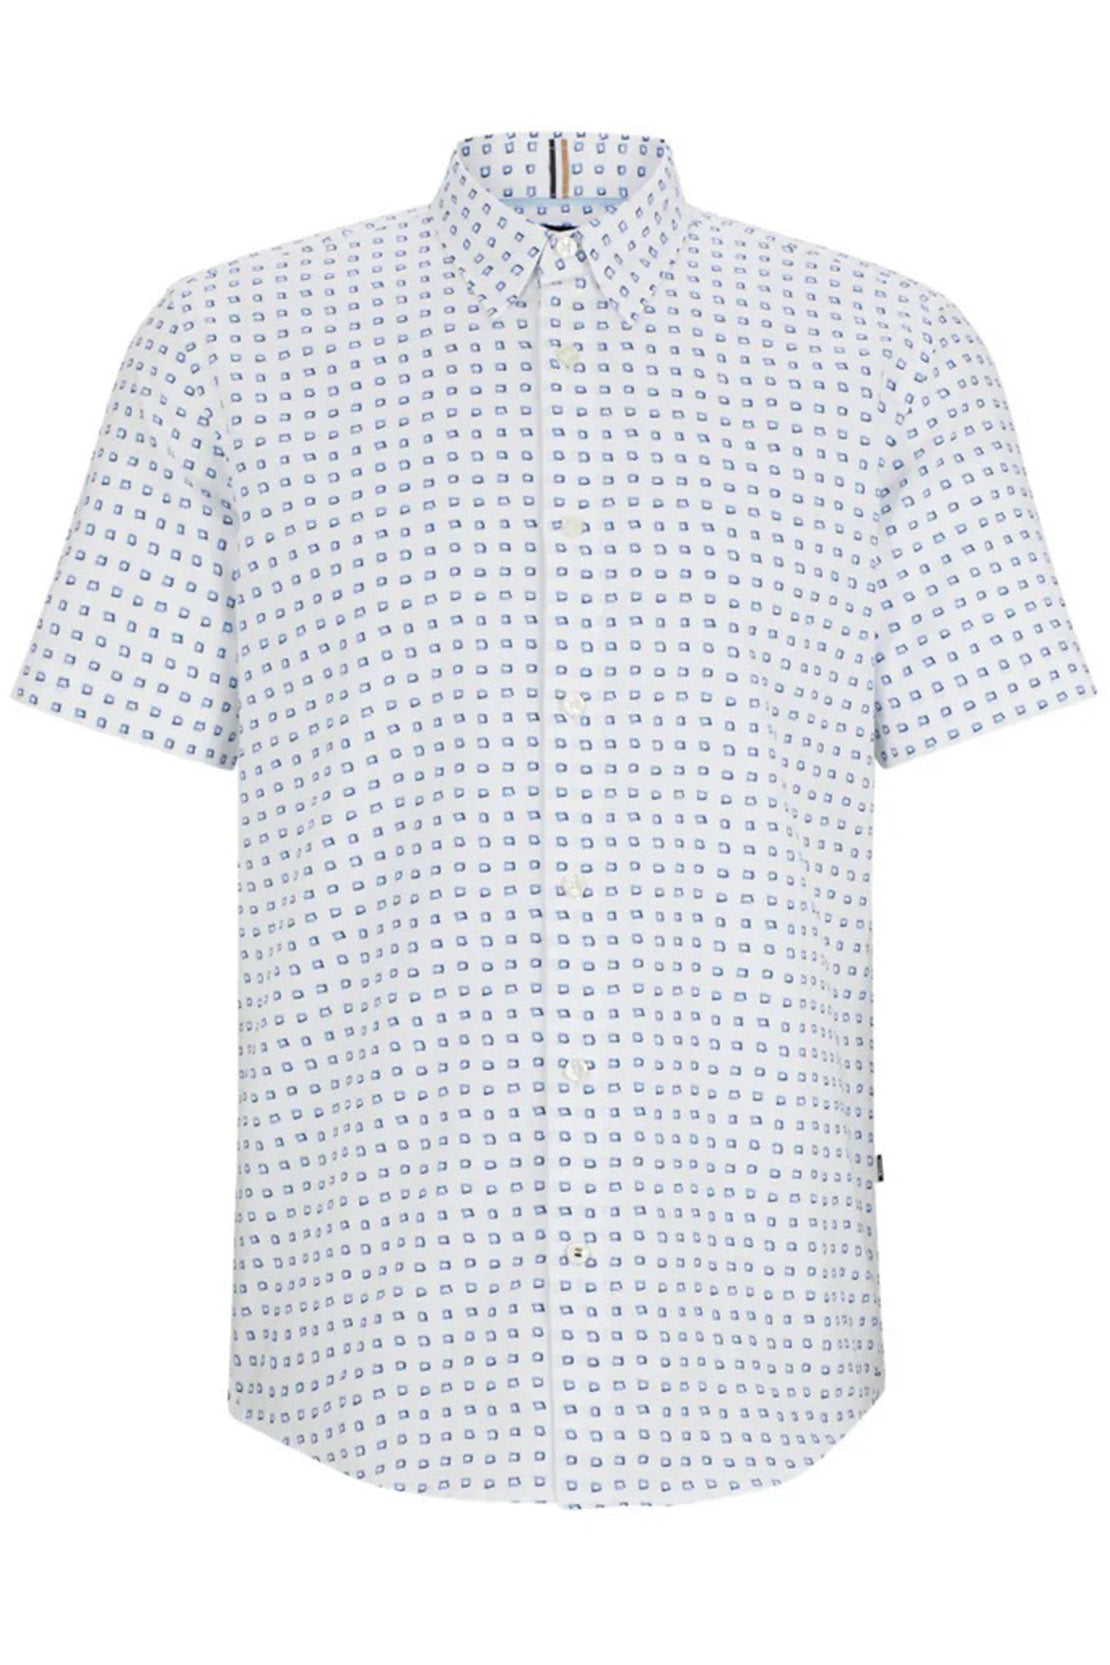 BOSS -  S-ROAN-KEN Slim Fit Short Sleeve Shirt In White With All Over Print 50513394 100